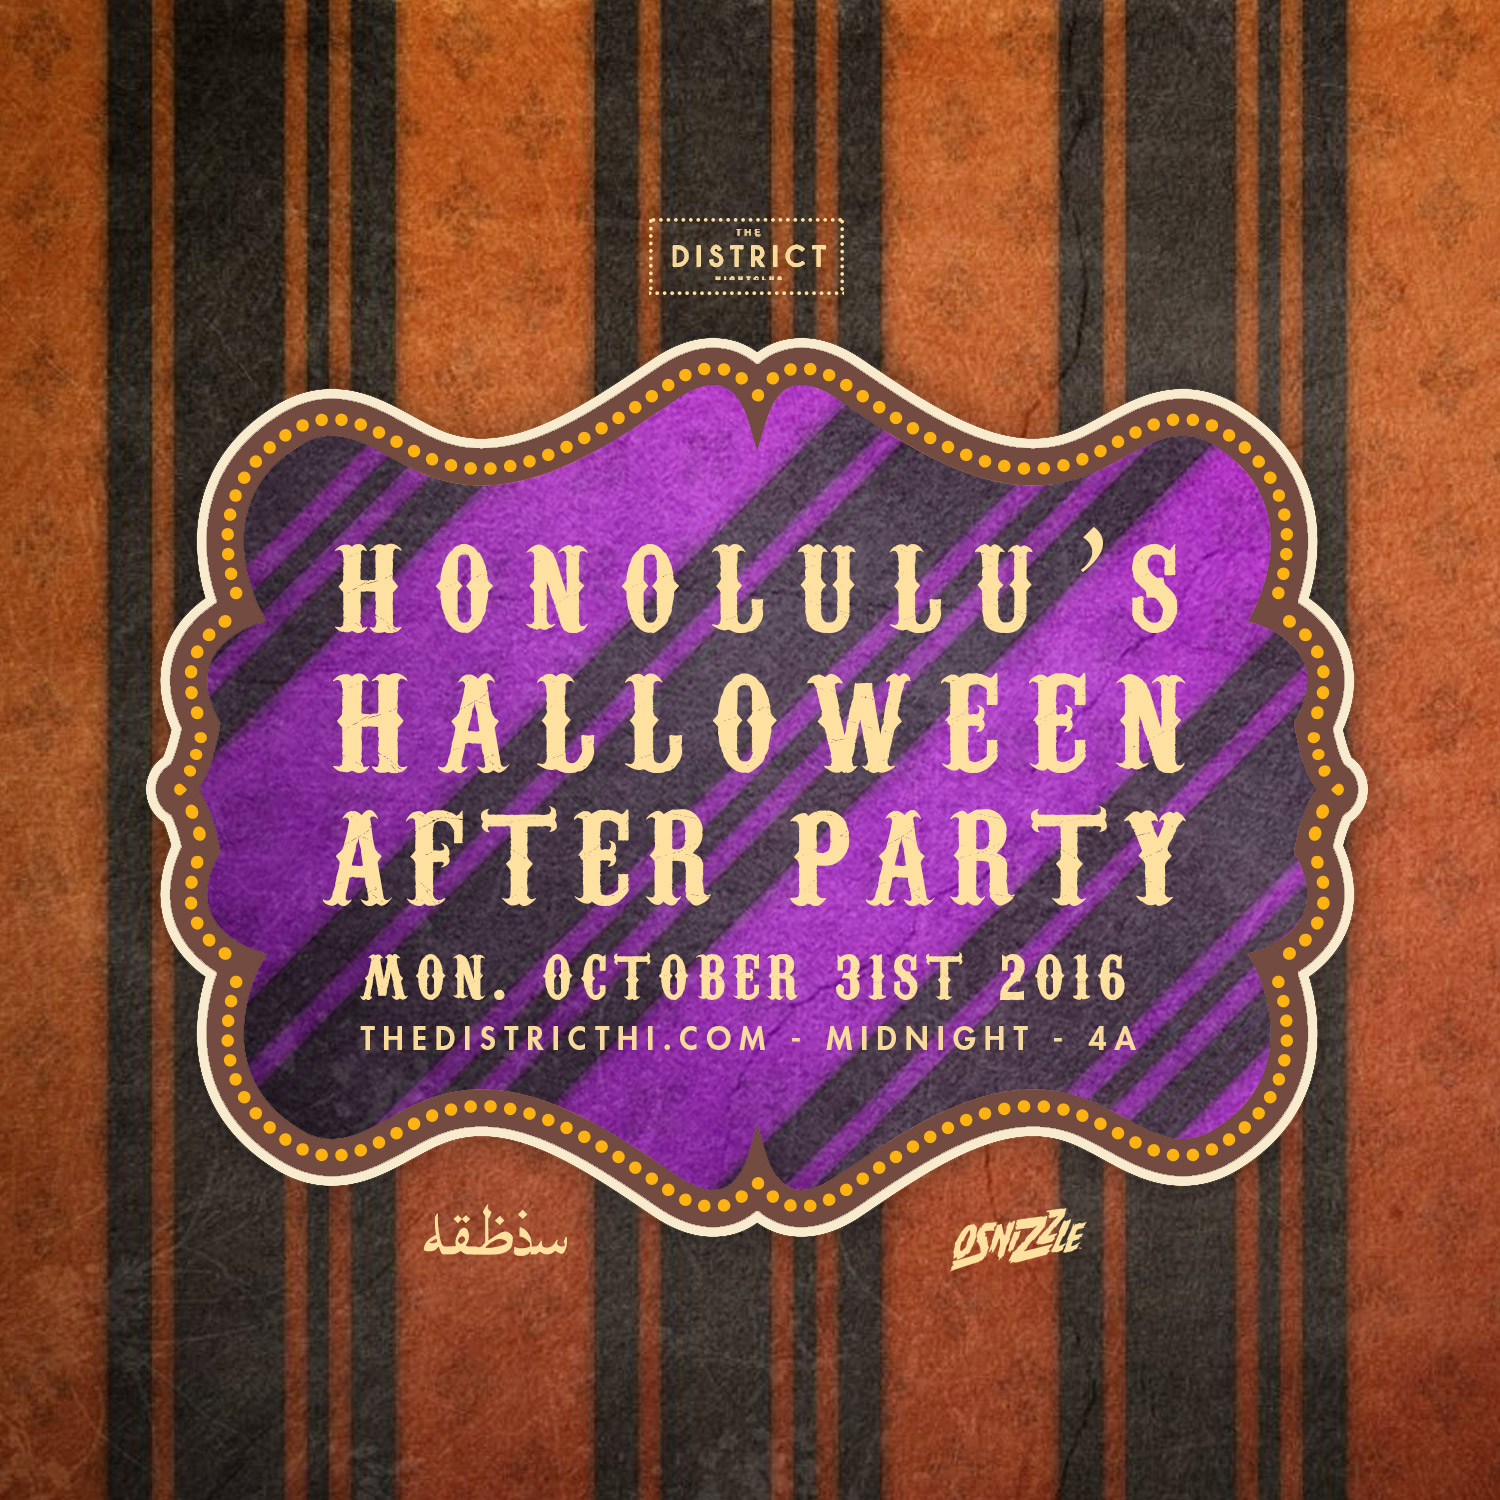 Honolulu's Halloween After Party Tickets 10/31/16